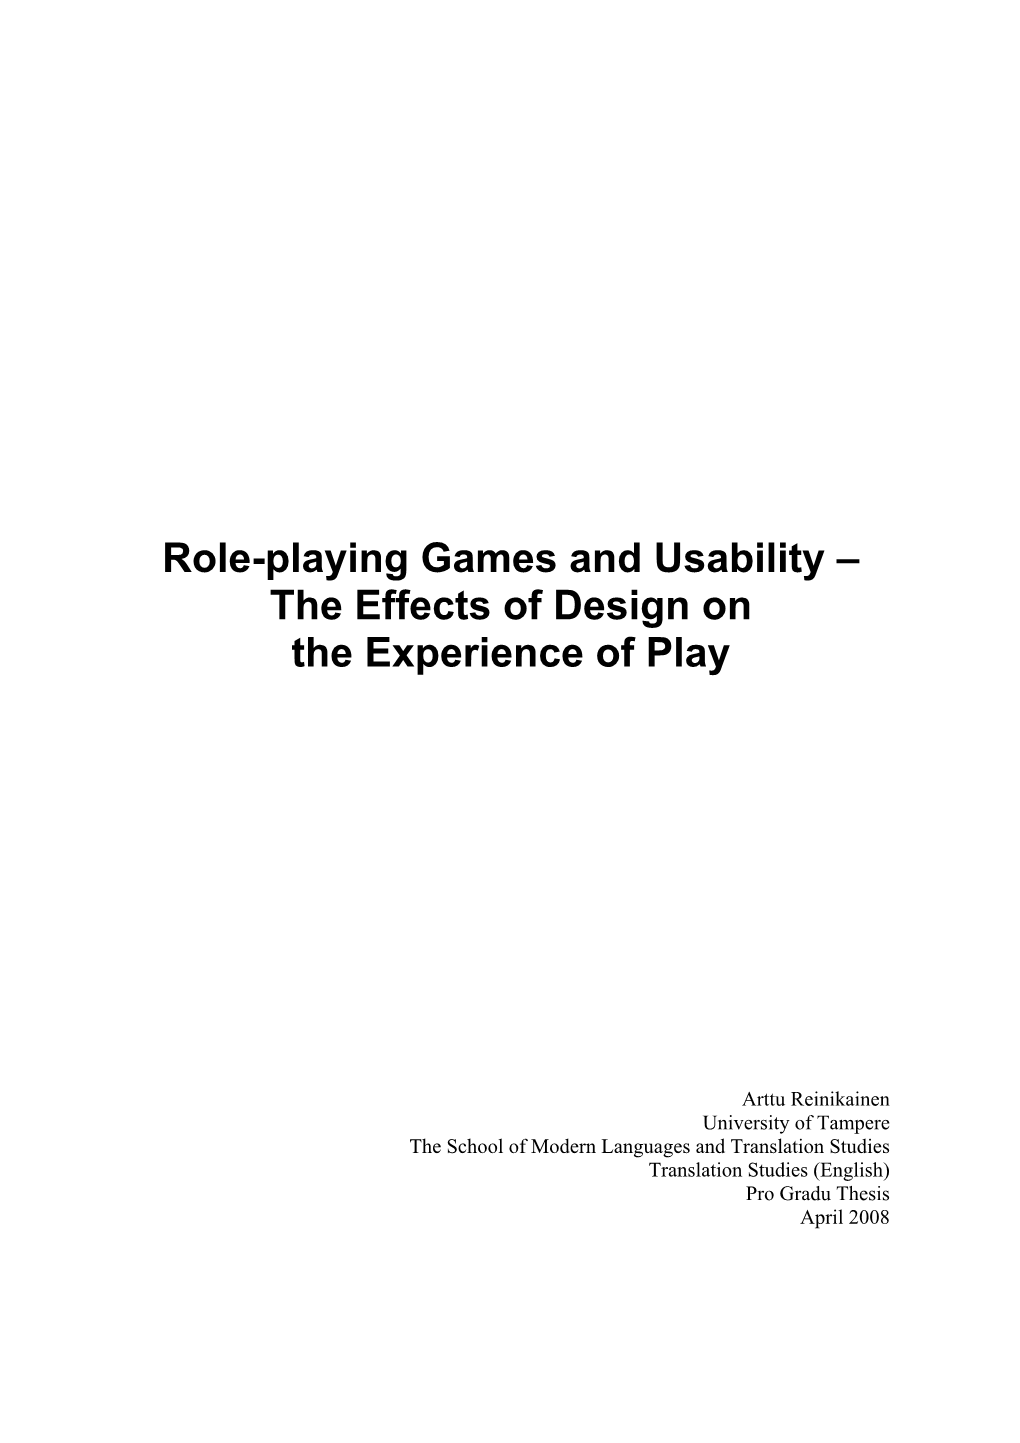 Role-Playing Games and Usability – the Effects of Design on the Experience of Play